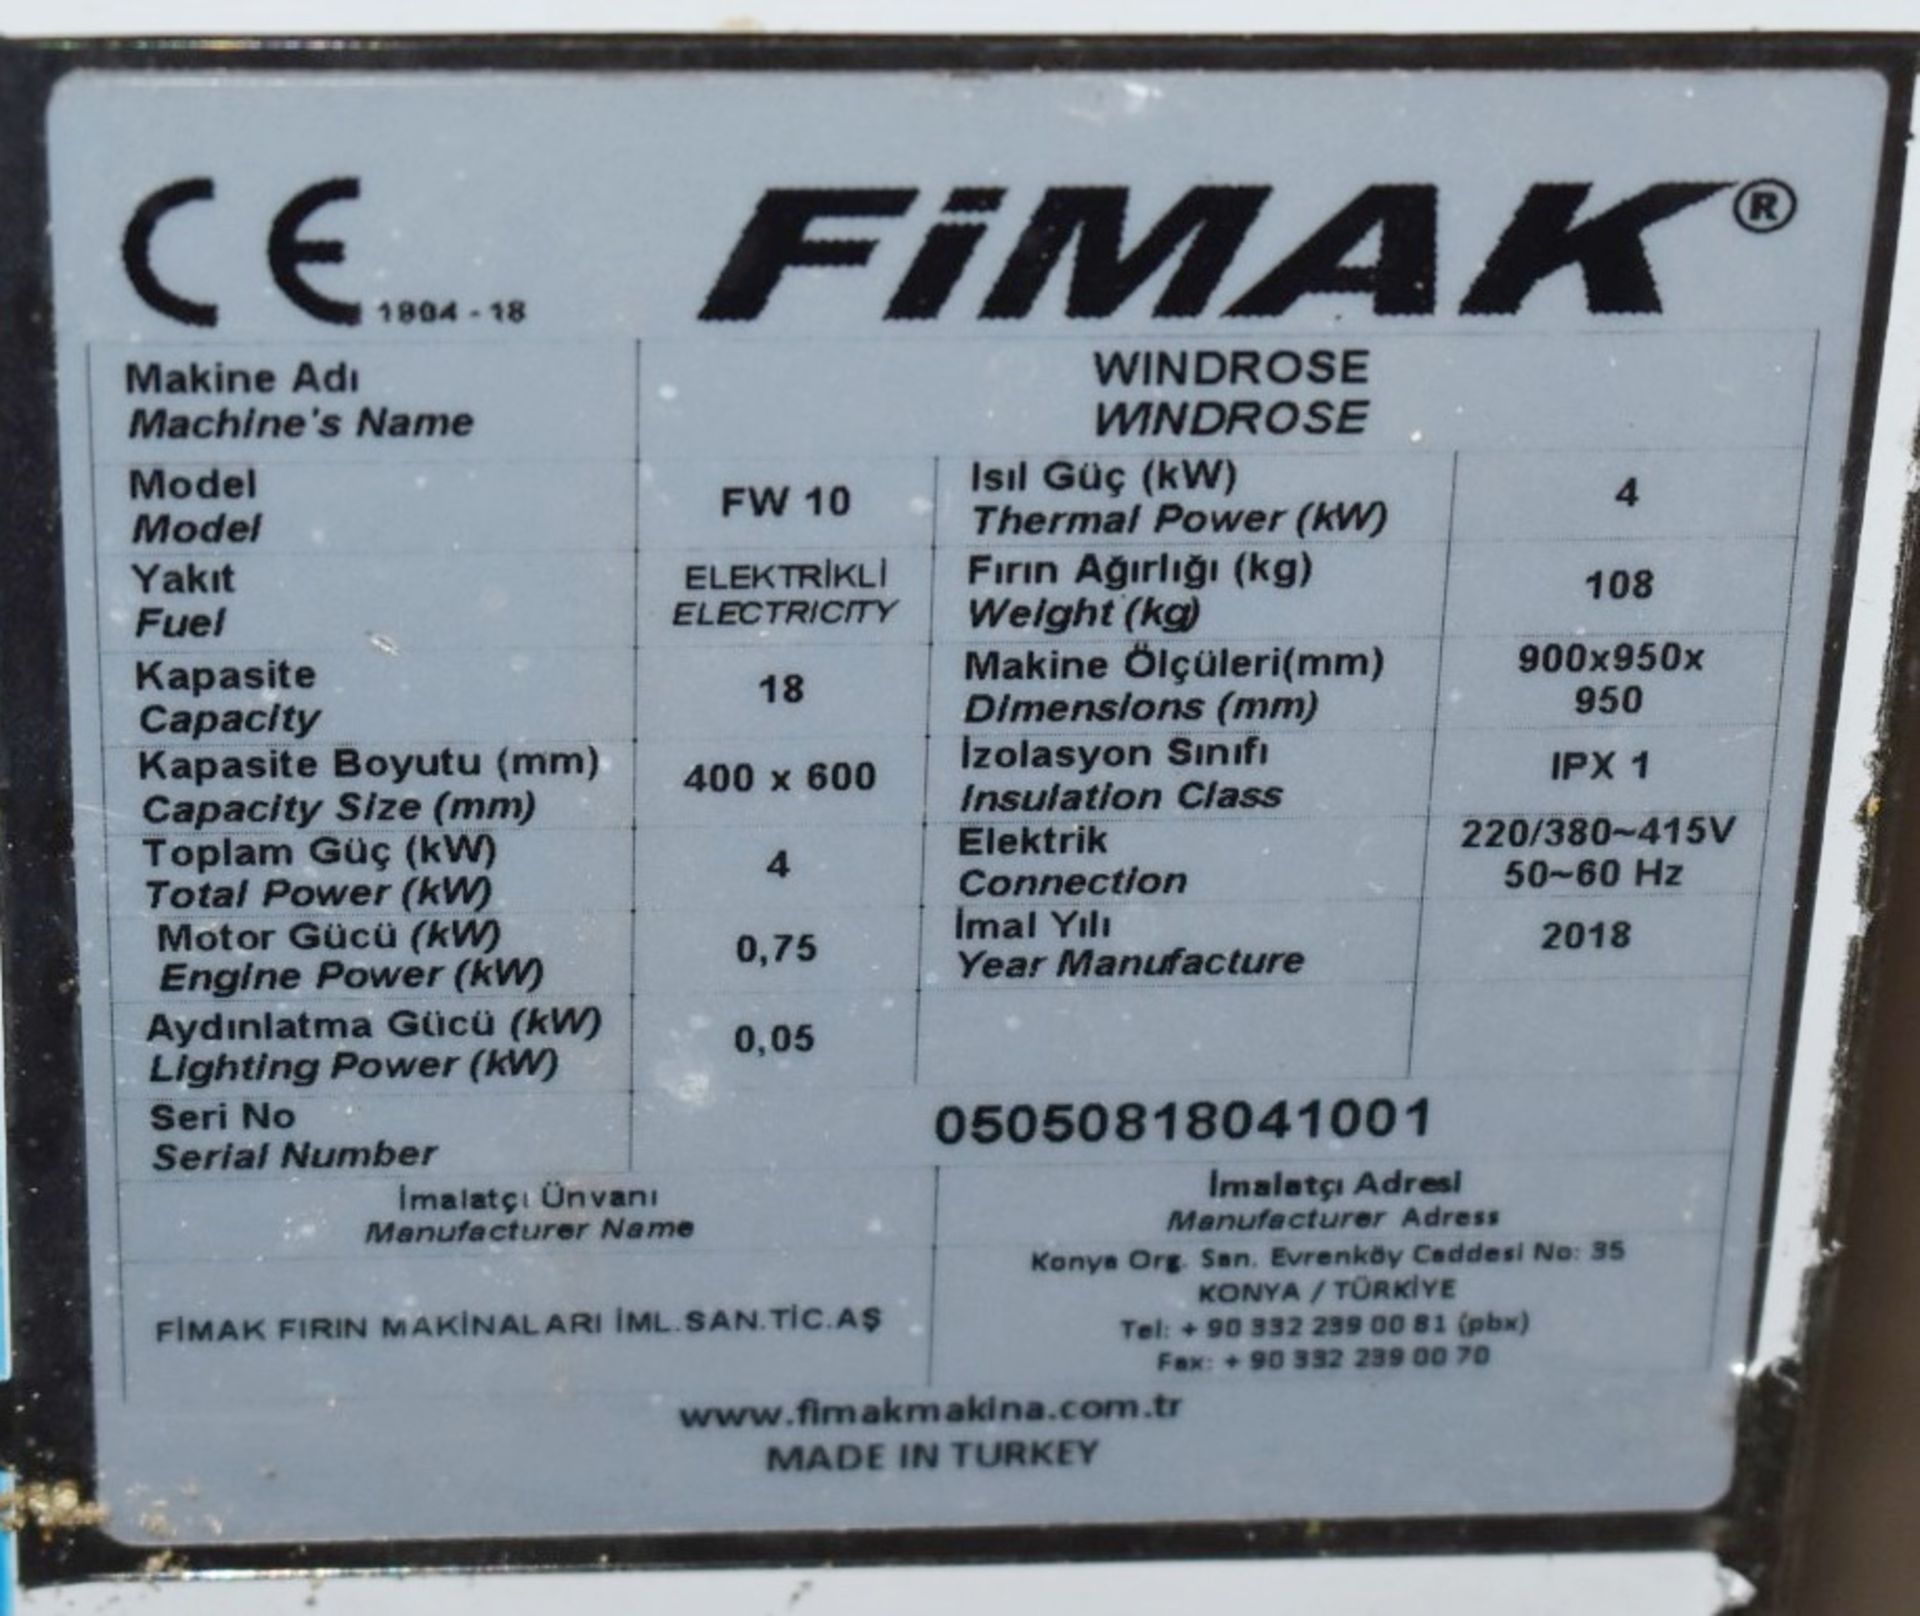 1 x FiMAK Windrose FW10 Convection Baking Oven - 240v - Size: 95 x 95 x 95 cms - Ref : HK321 WH2 B5G - Image 7 of 8